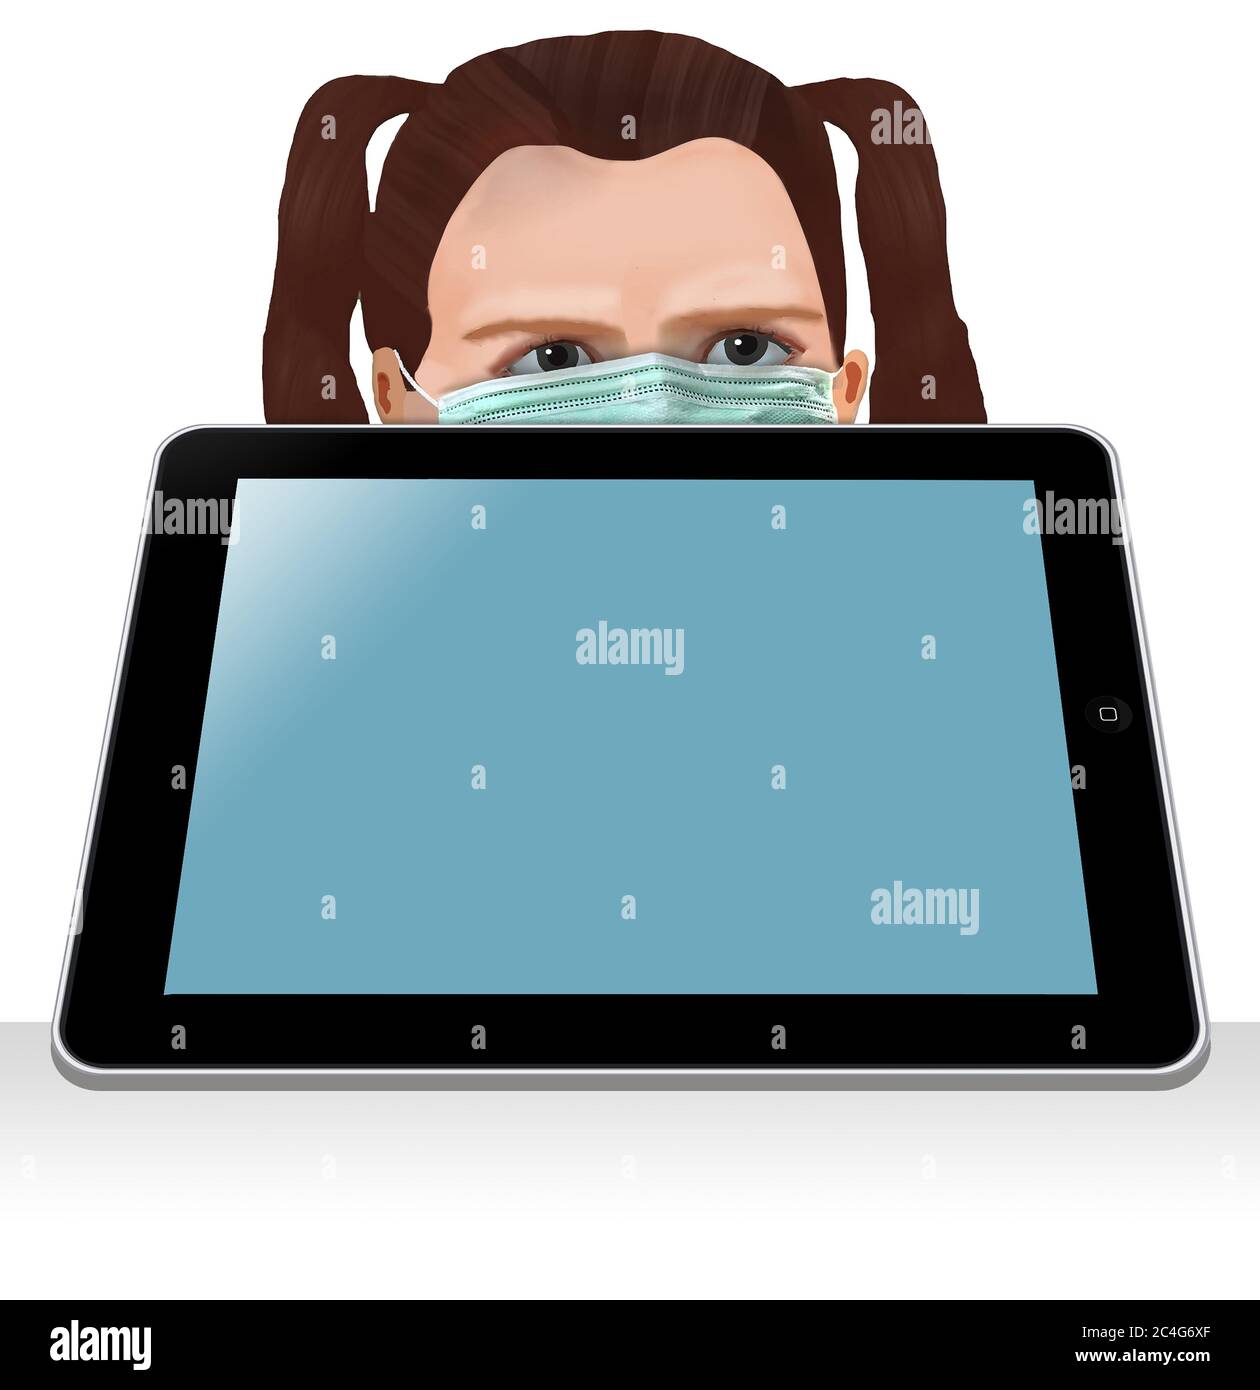 A young girl, a student, wearing a surgical mask, peeks over the top of an electronic tablet she uses to do e-learning. There is blank text or copy ar Stock Photo